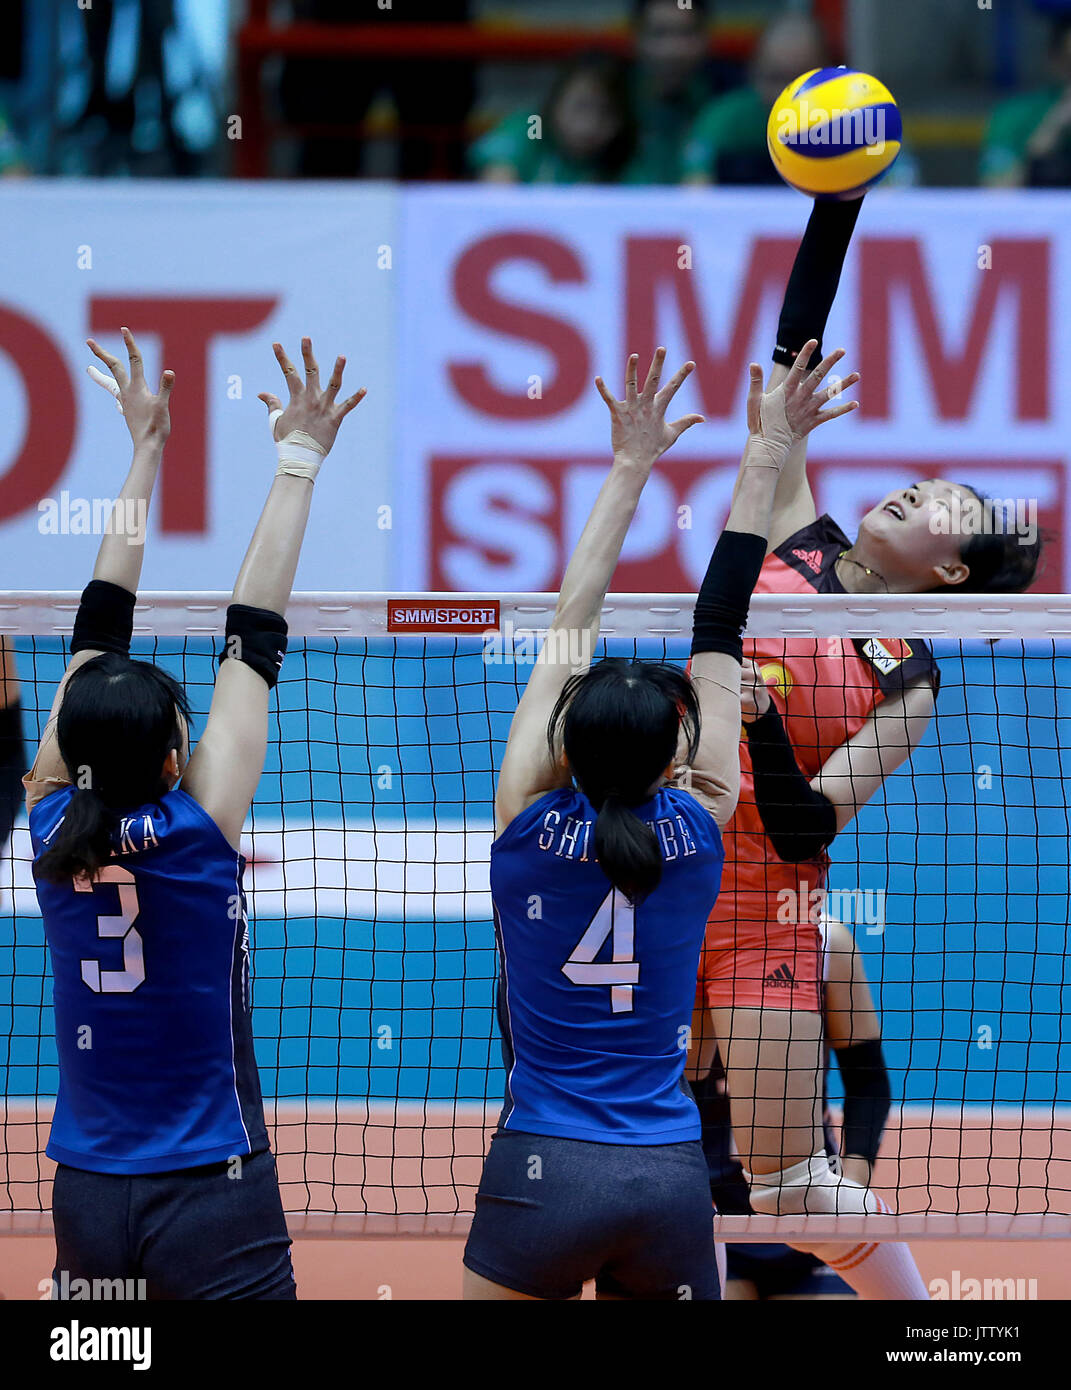 Laguna Province, Philippines. 10th Aug, 2017. Cai Xiao Qing of China (R) competes against Nana Iwasaka (L) and Risa Shinnabe (C) of Japan during their preliminary round match in the 2017 Asian Women's Volleyball Championship in Laguna Province, the Philippines, Aug. 10, 2017. Japan won 3-0. Credit: Rouelle Umali/Xinhua/Alamy Live News Stock Photo